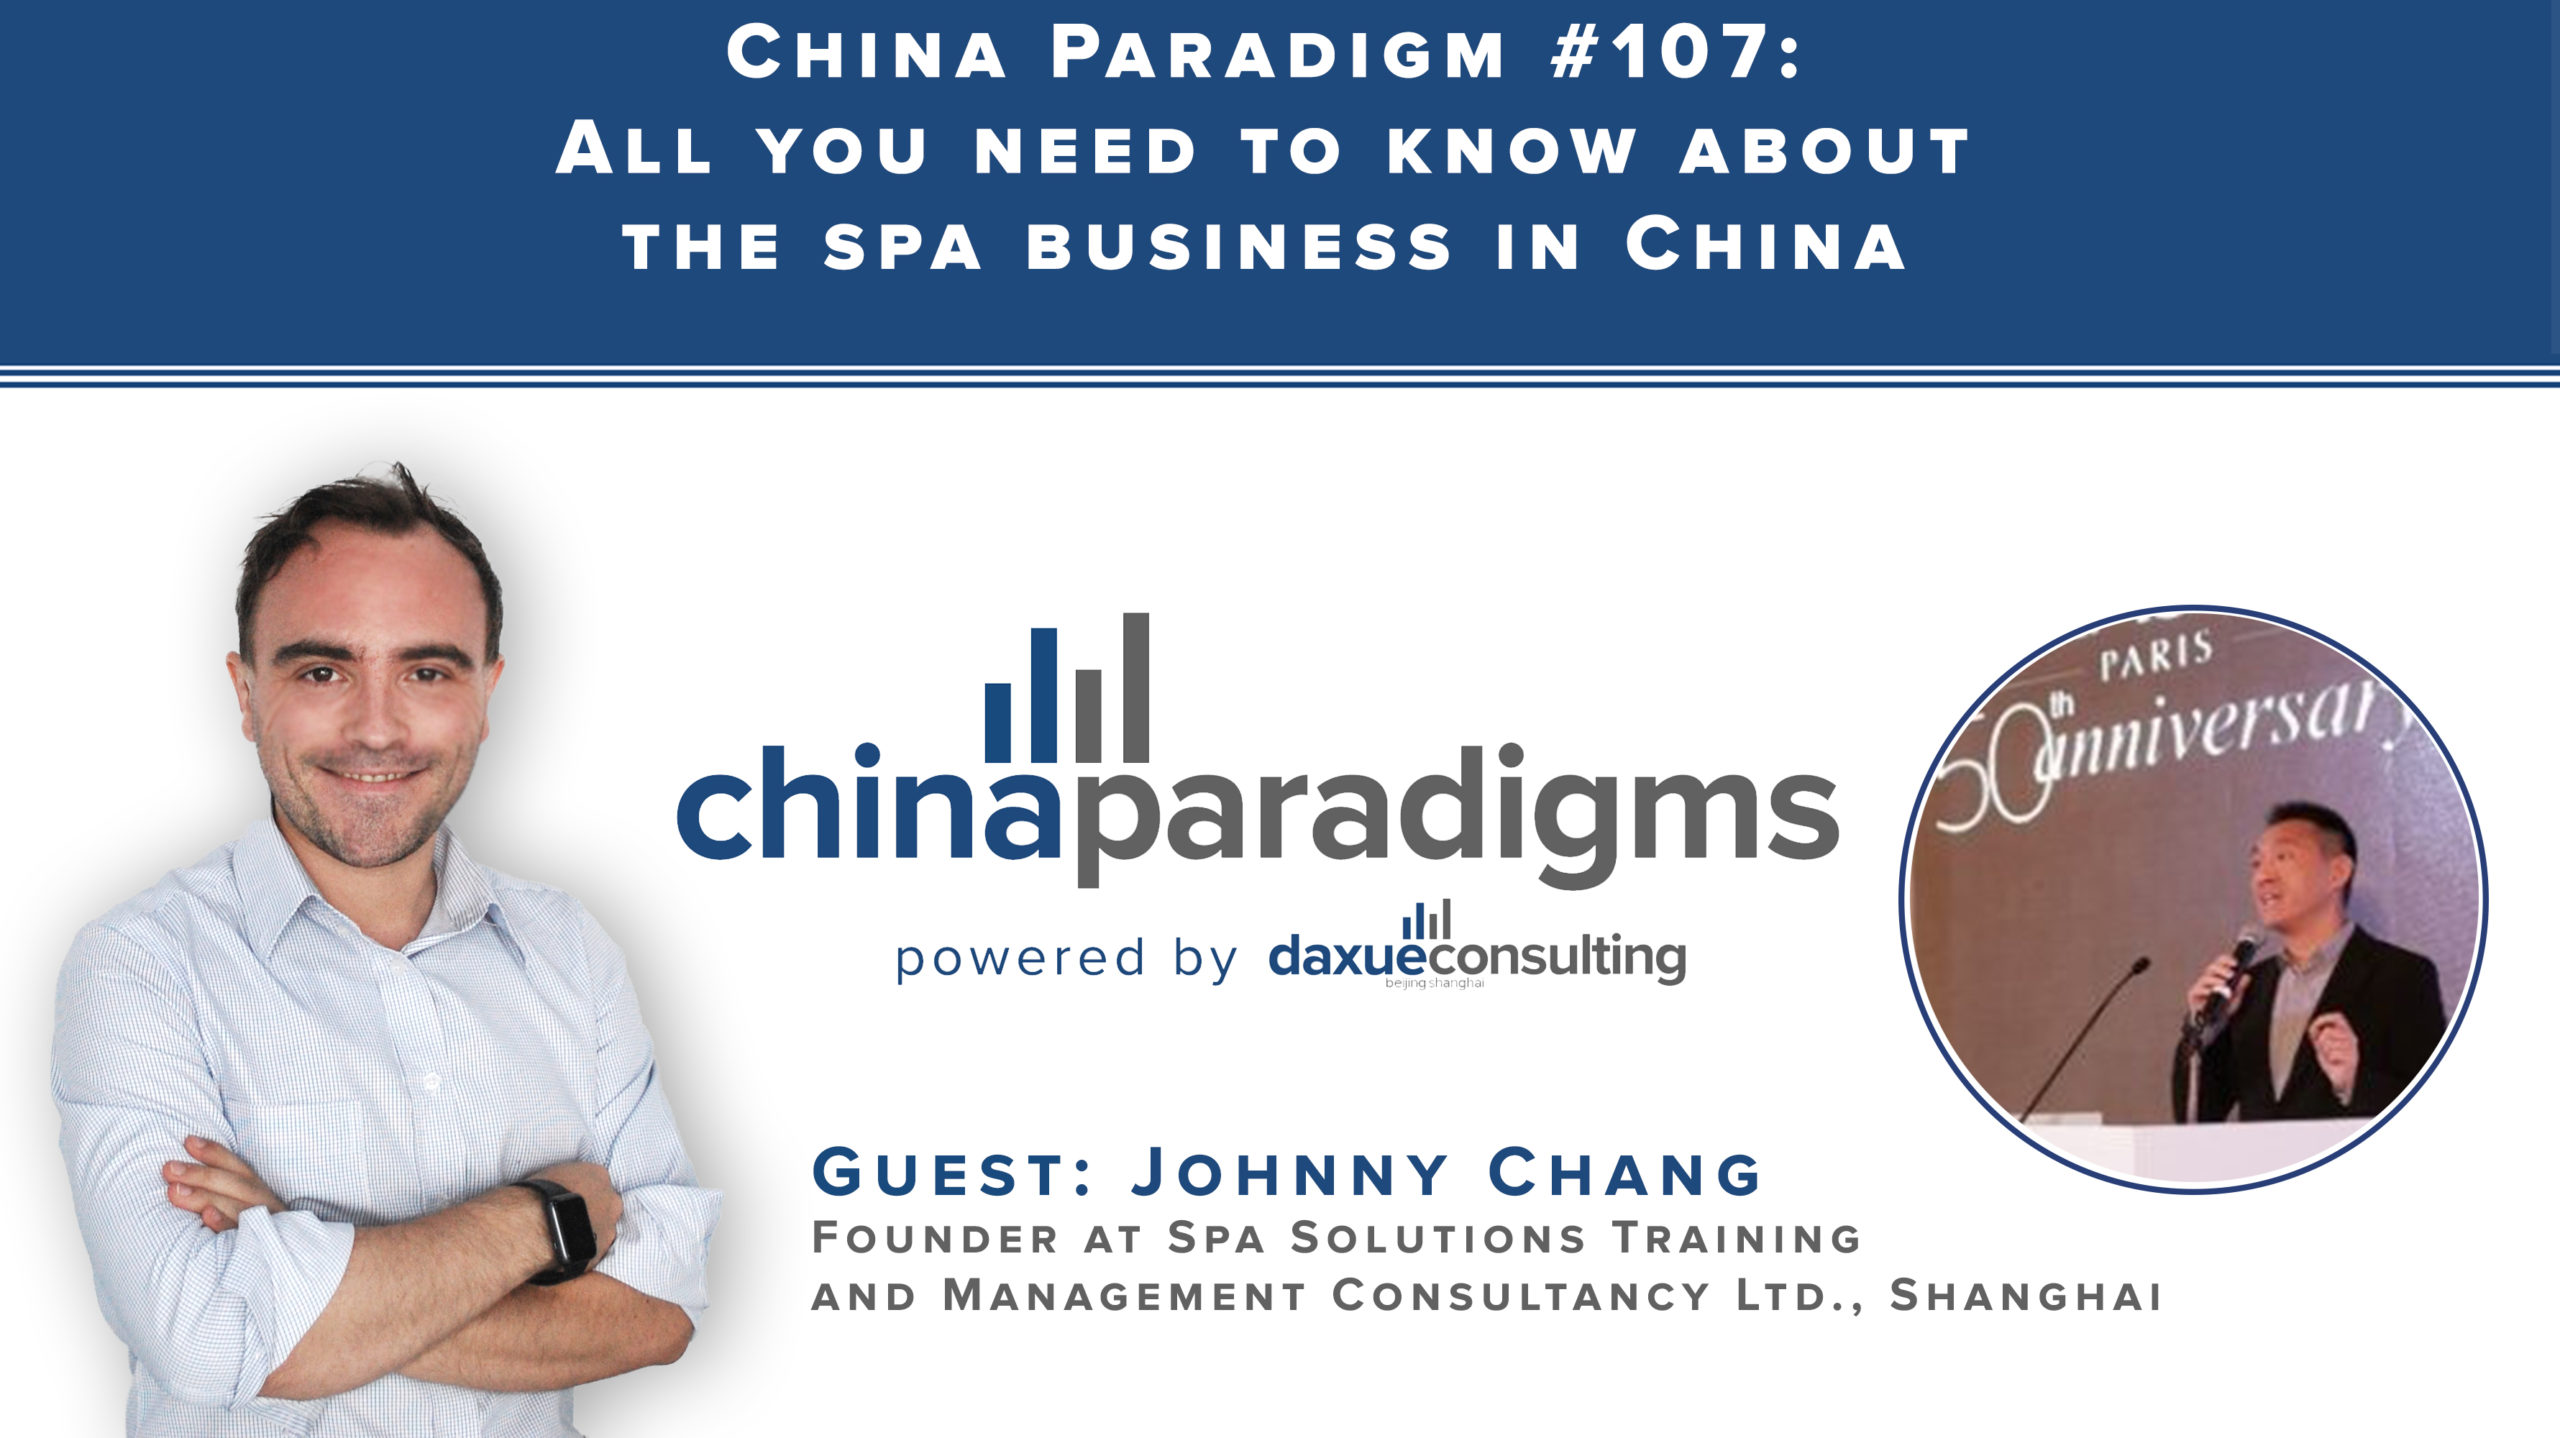 China Paradigm 107: All you need to know about the spa business in China